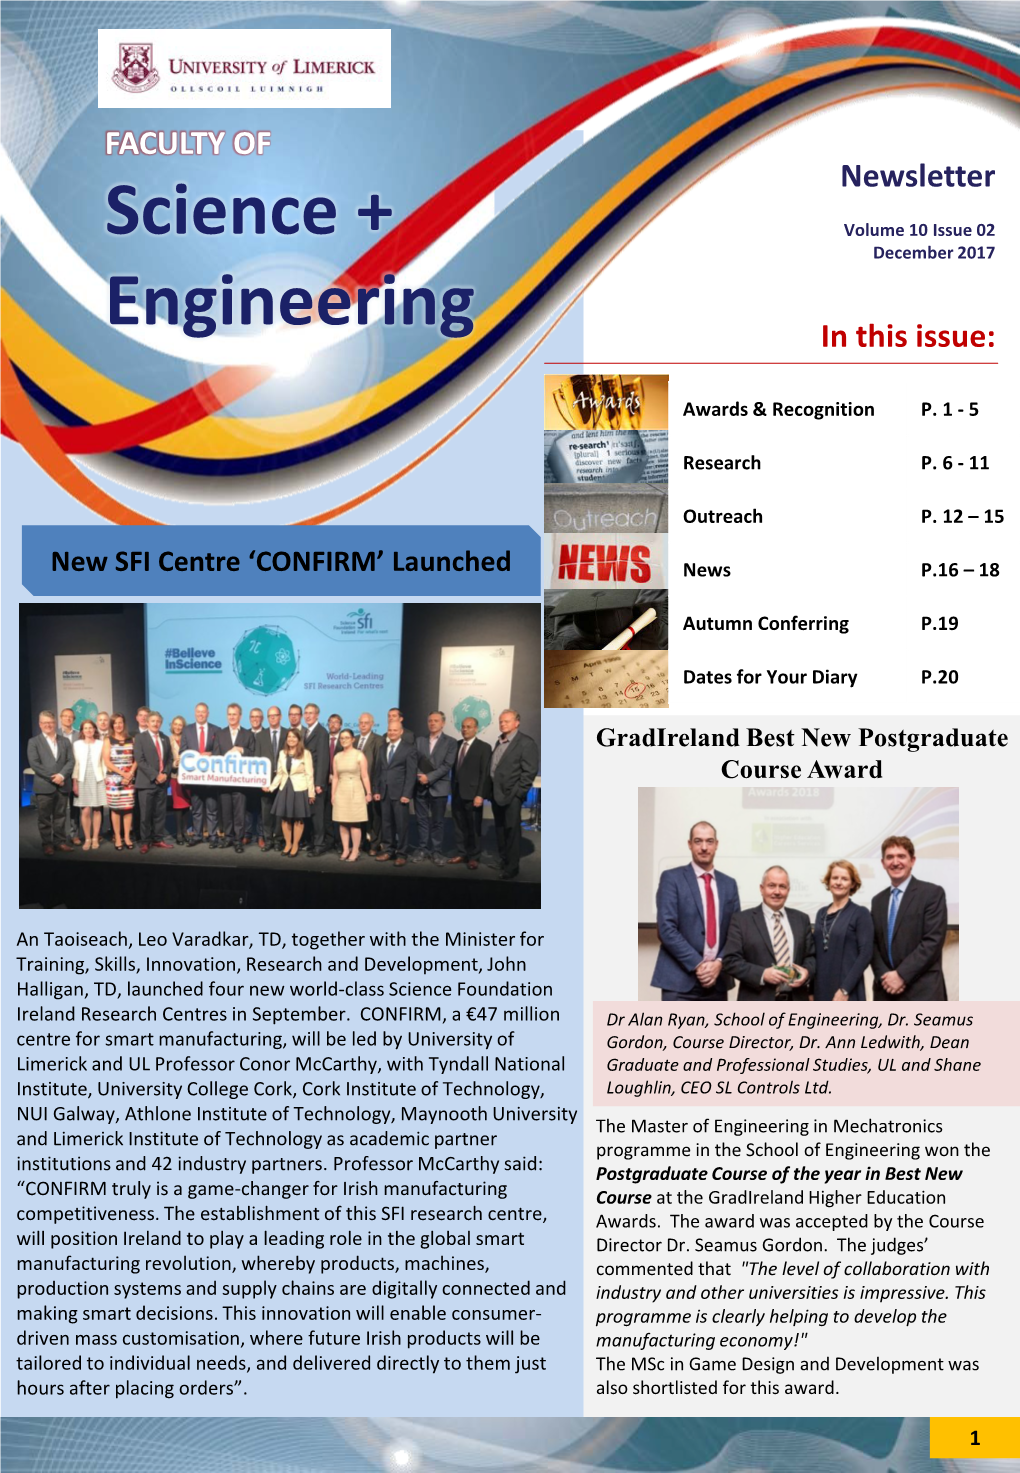 FACULTY of FACULTY of Science + Newsletter Science + Volume 10 Issue 02 Engineering December 2017 Engineering in This Issue